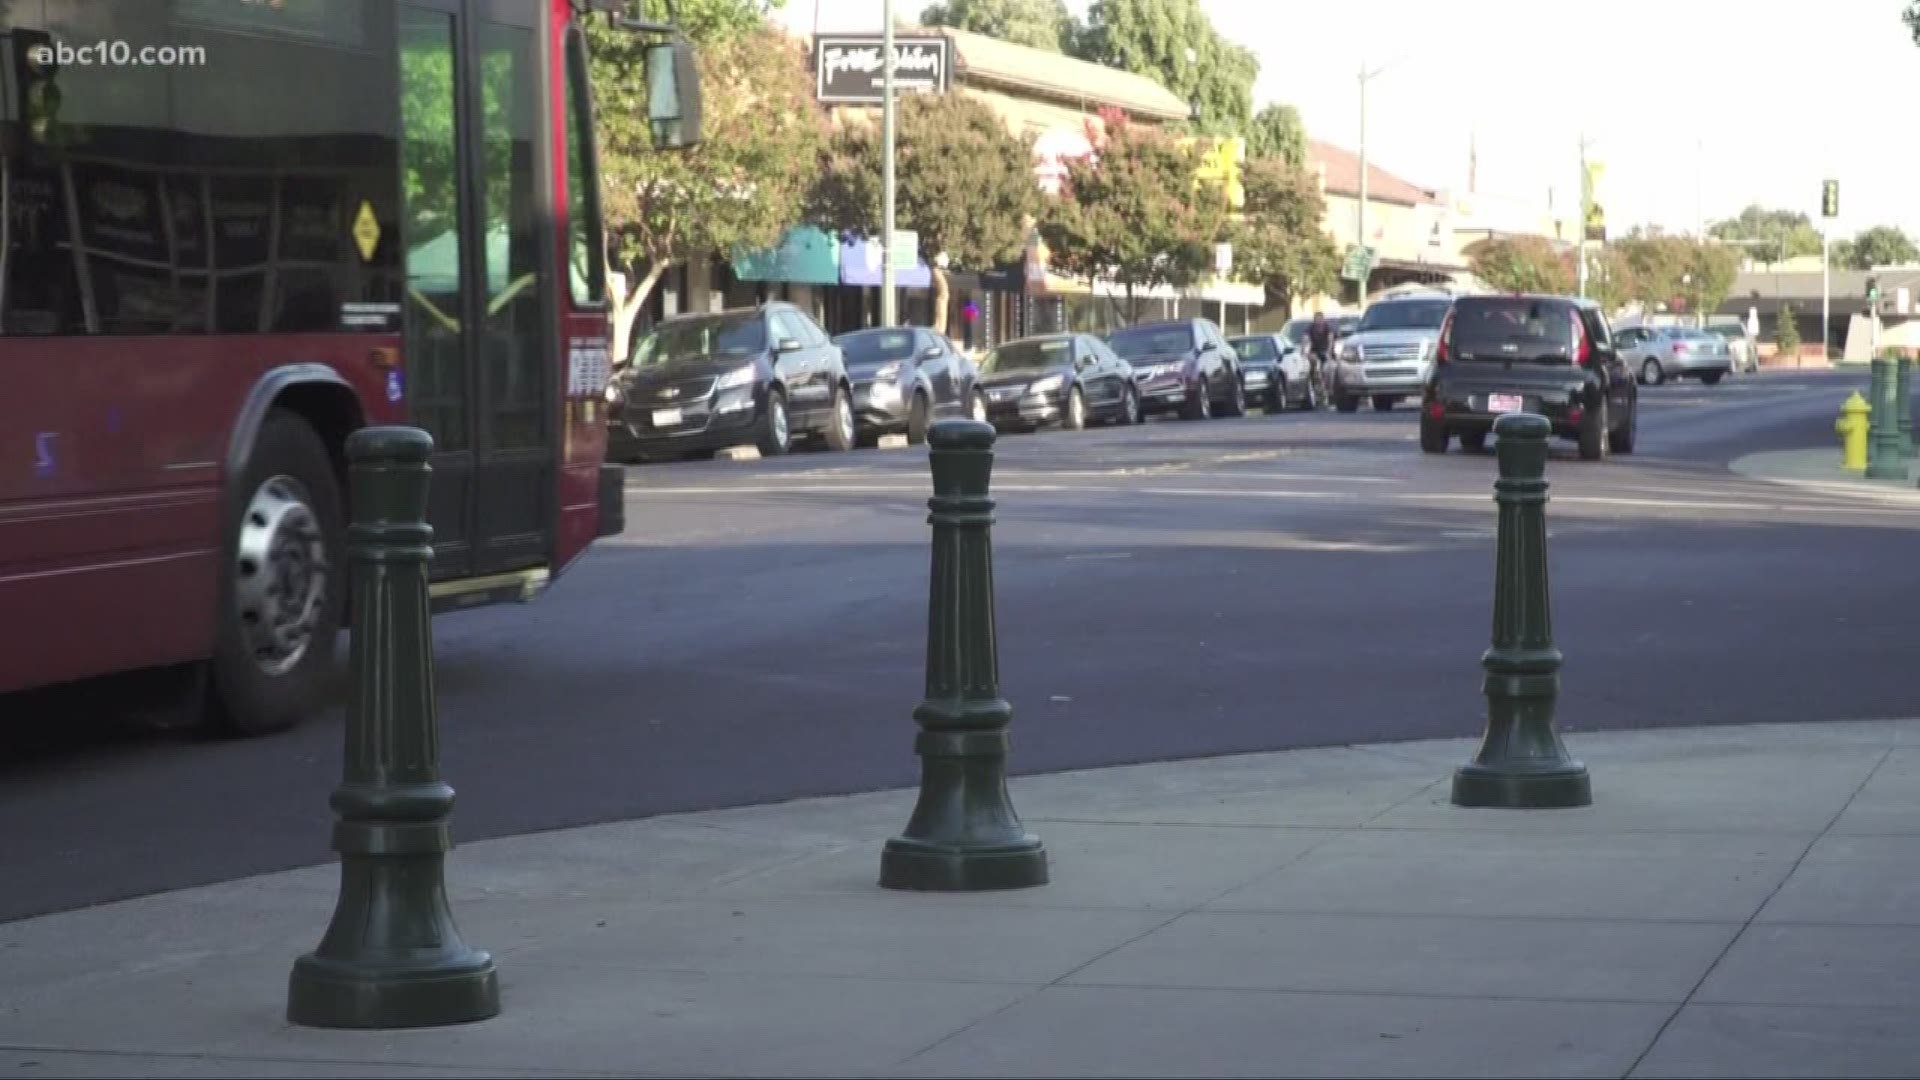 Stockton Business owners want people to know there is more to Miracle Mile than negativity.